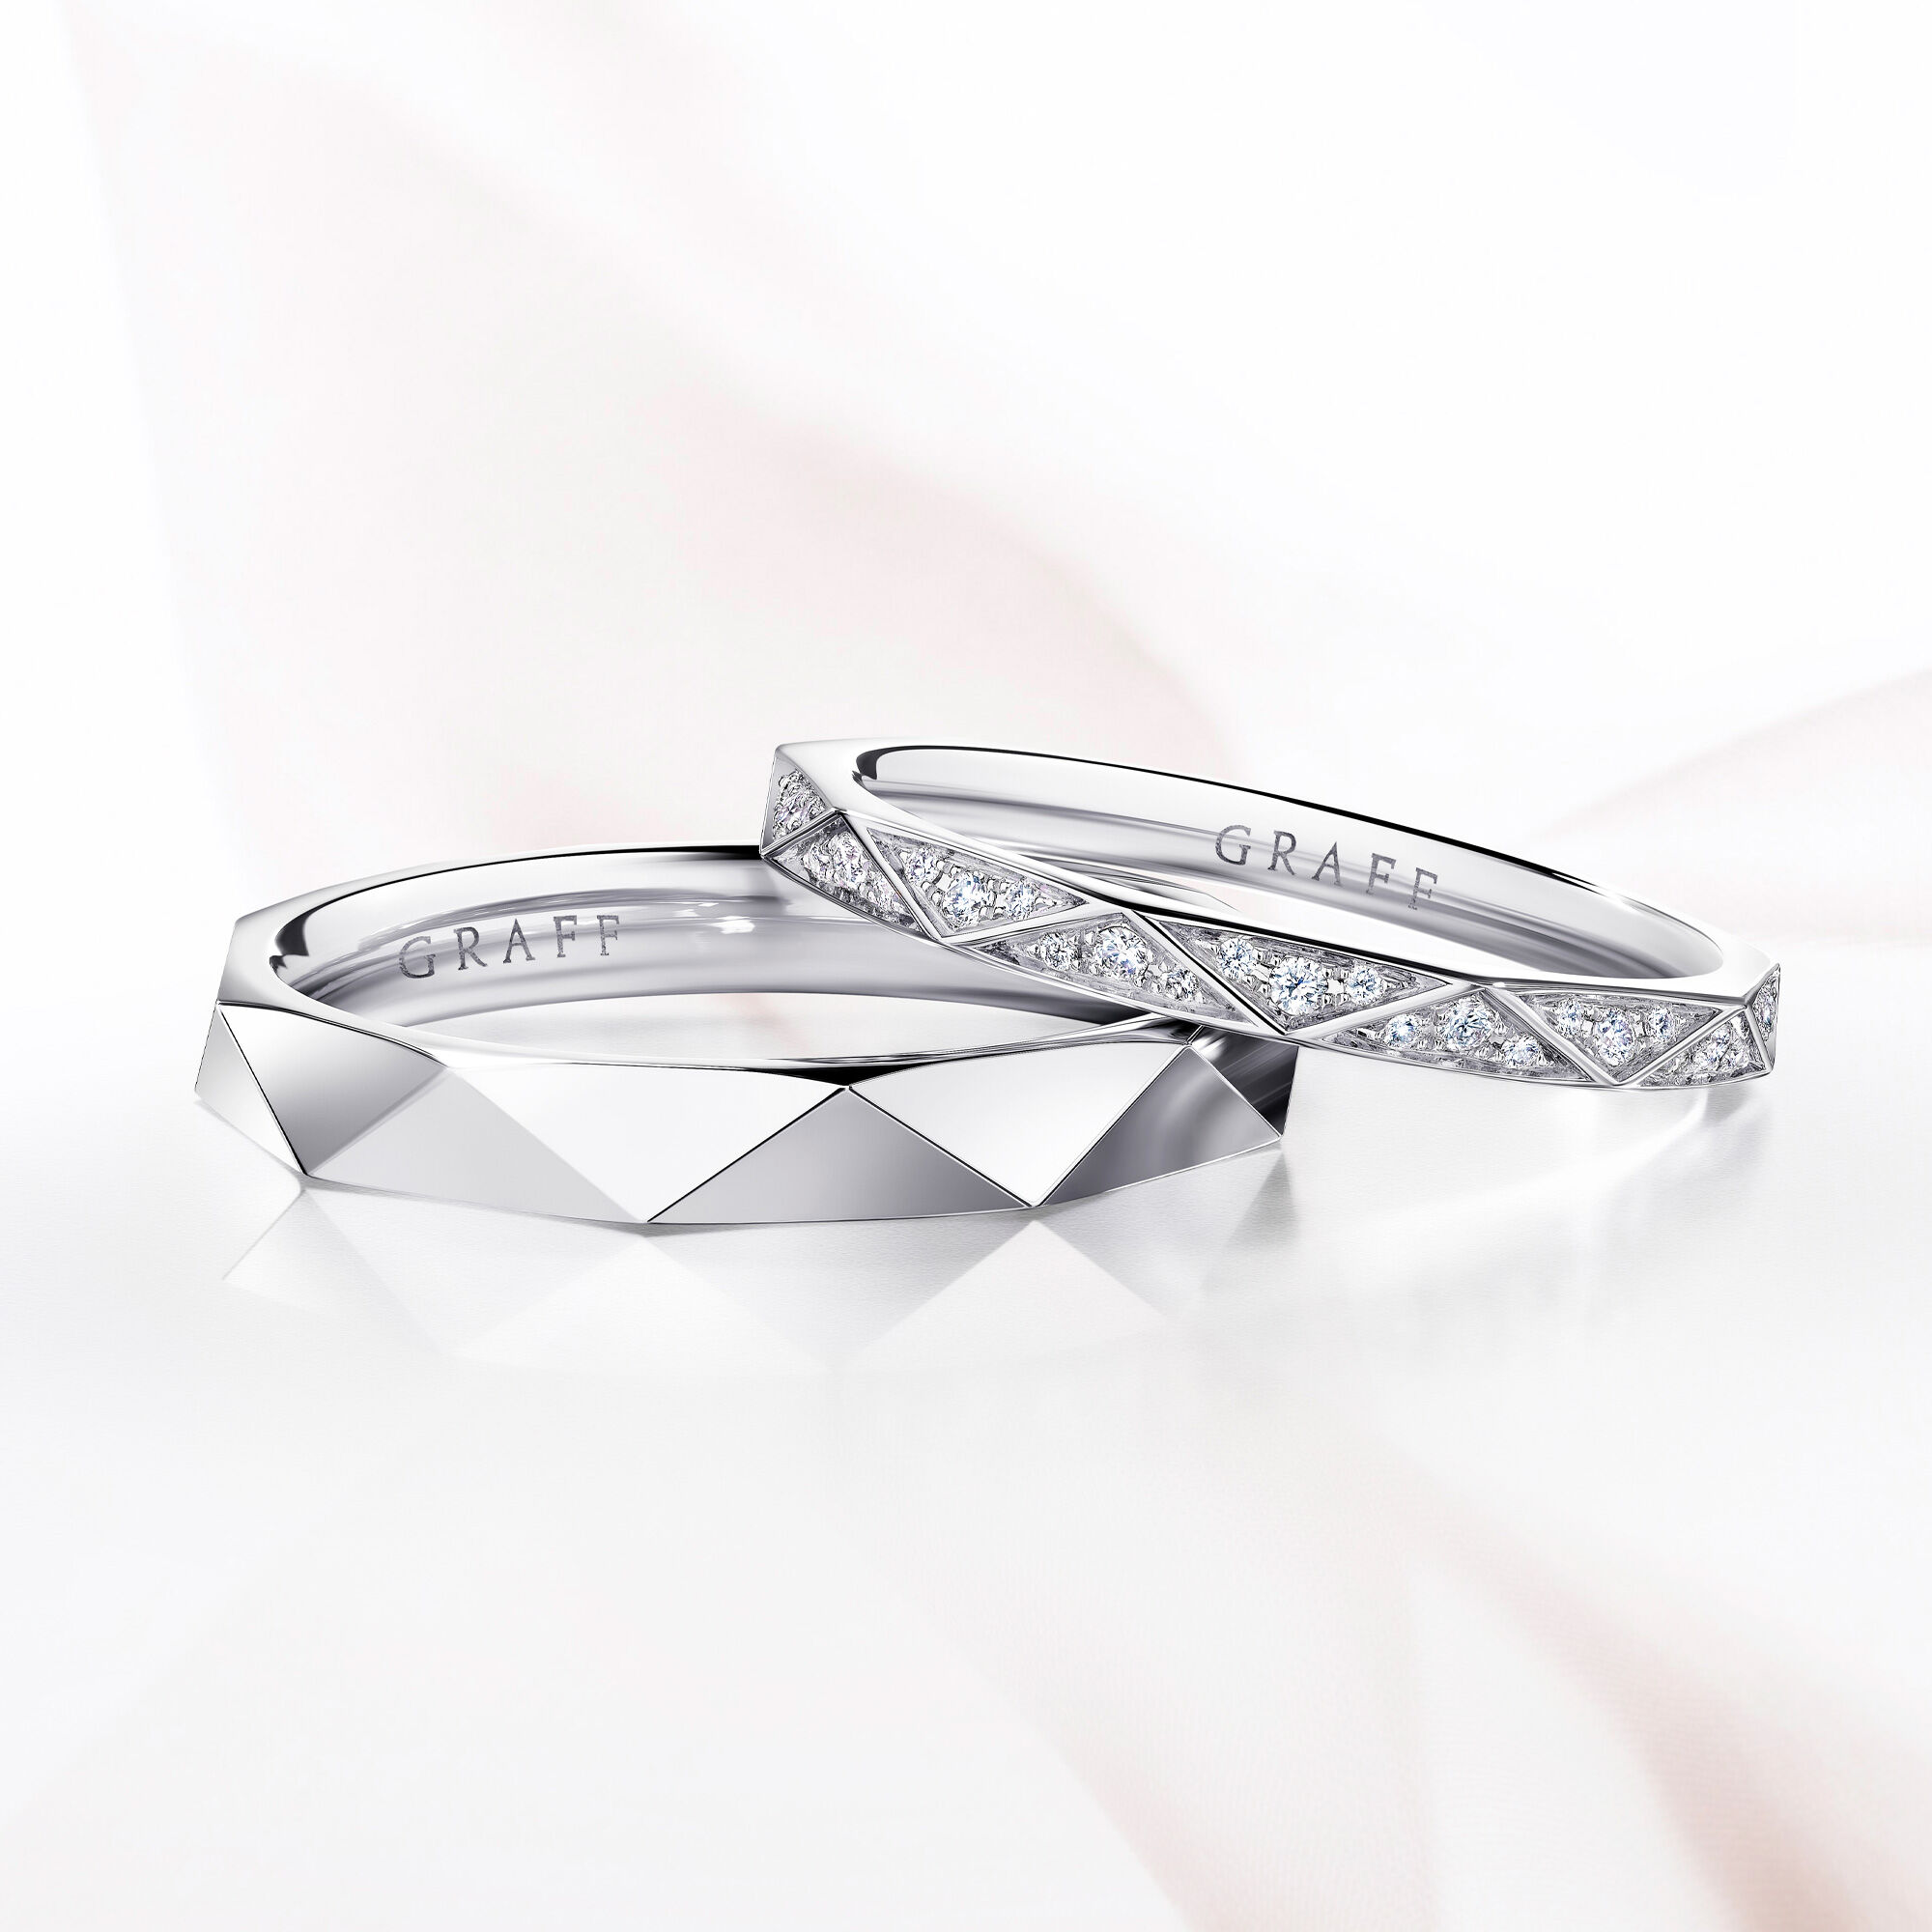 Graff Engagement & Bridal Collections for Him & for Her | Graff